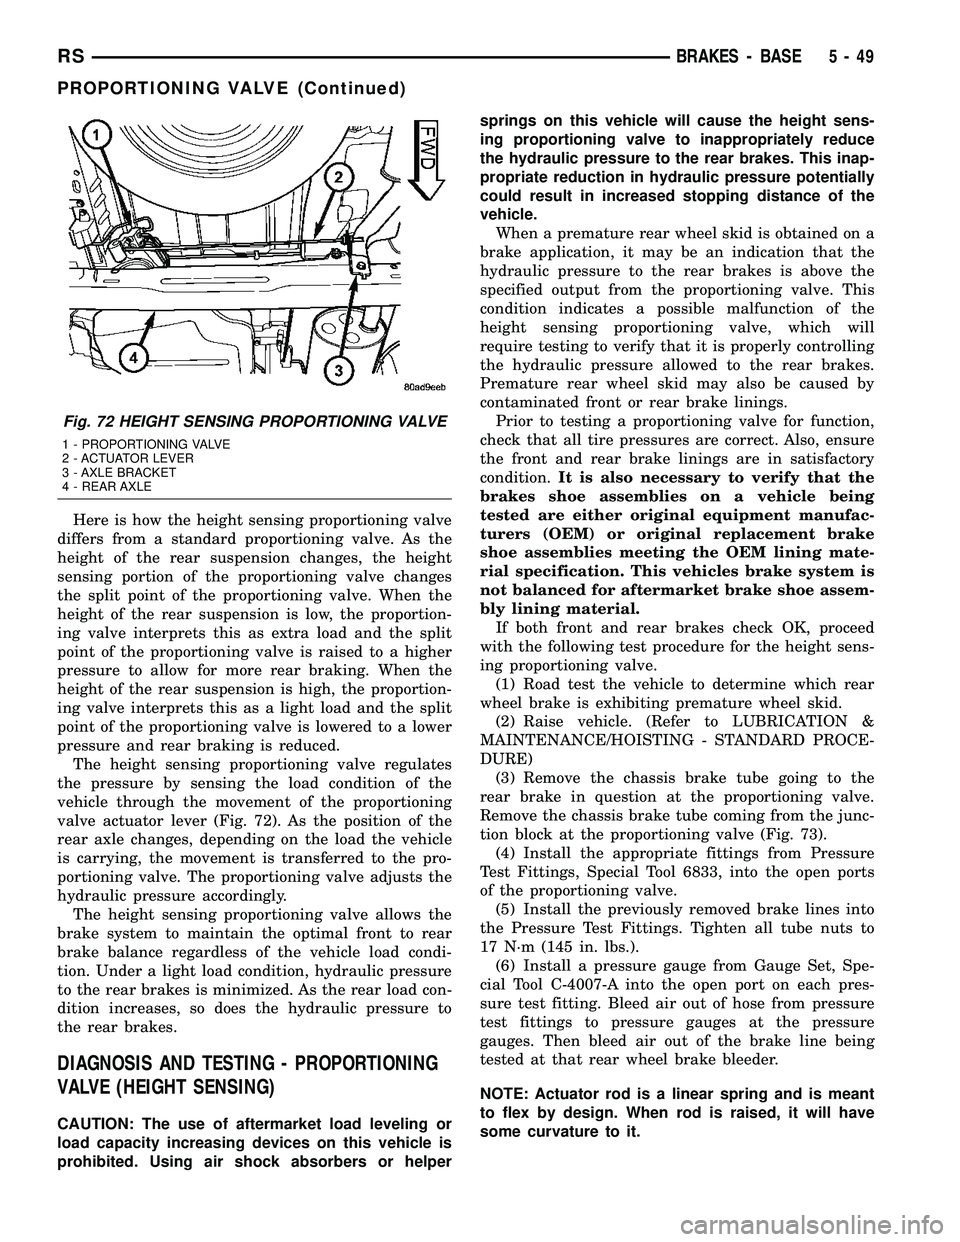 CHRYSLER VOYAGER 2004  Service Manual Here is how the height sensing proportioning valve
differs from a standard proportioning valve. As the
height of the rear suspension changes, the height
sensing portion of the proportioning valve chan